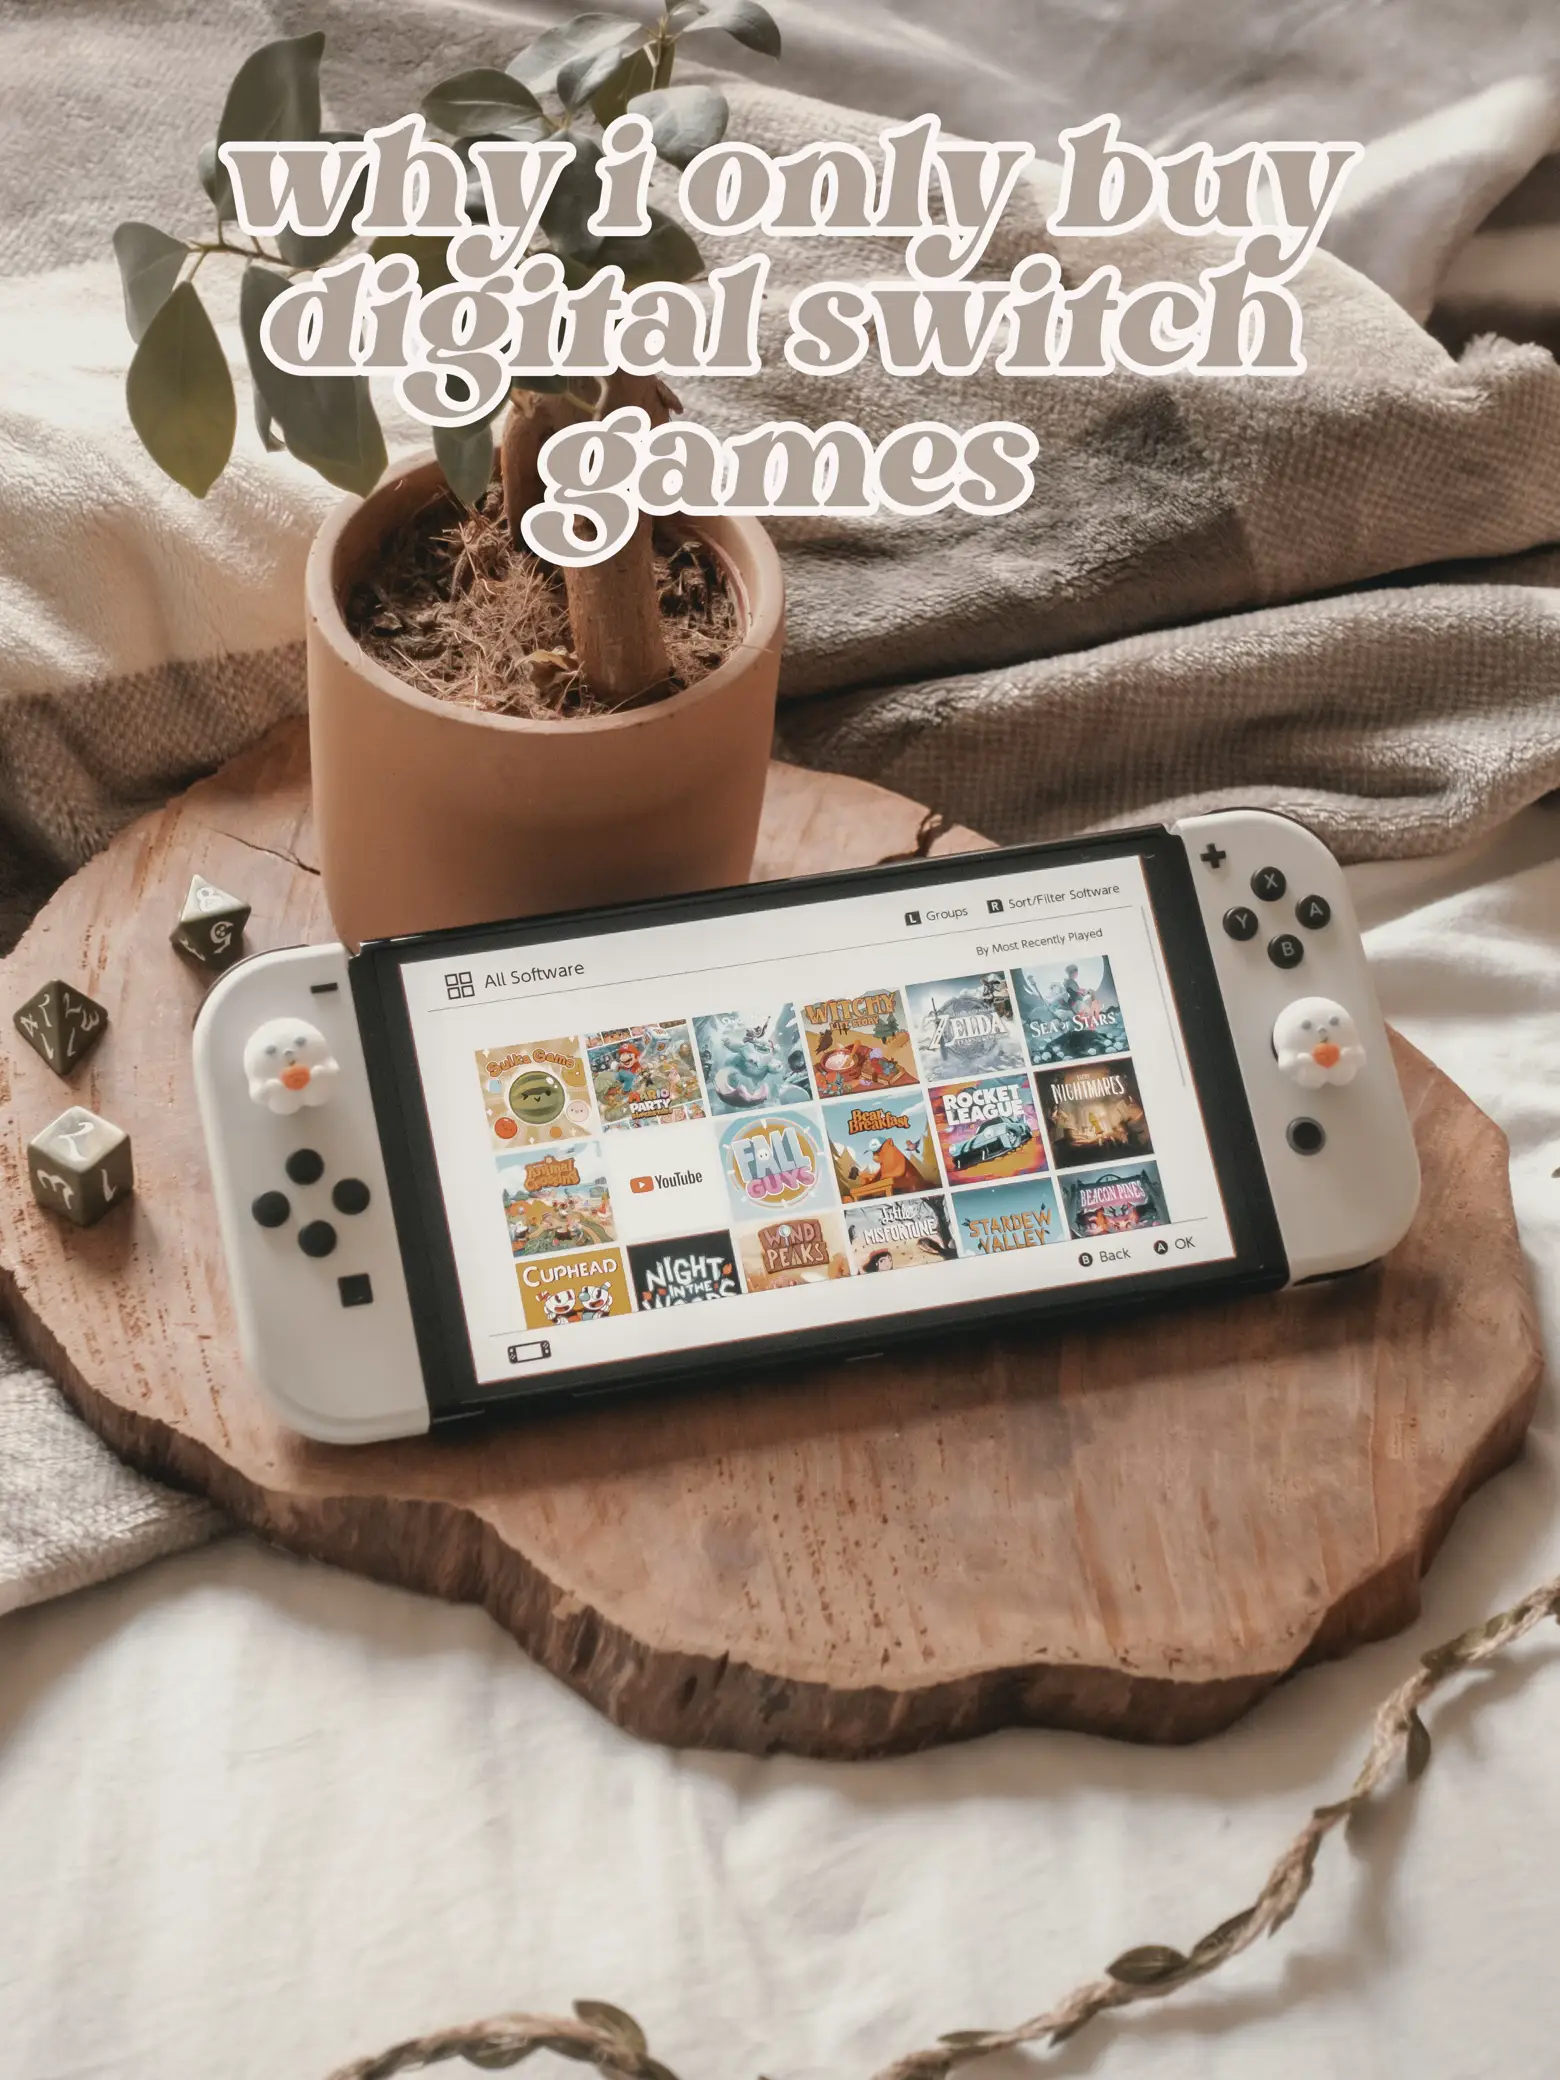 Nintendo Switch Game Deals - Princess Peach: Showtime! - Games Cartridge  Physical Card for Nintendo Switch Oled Lite - AliExpress